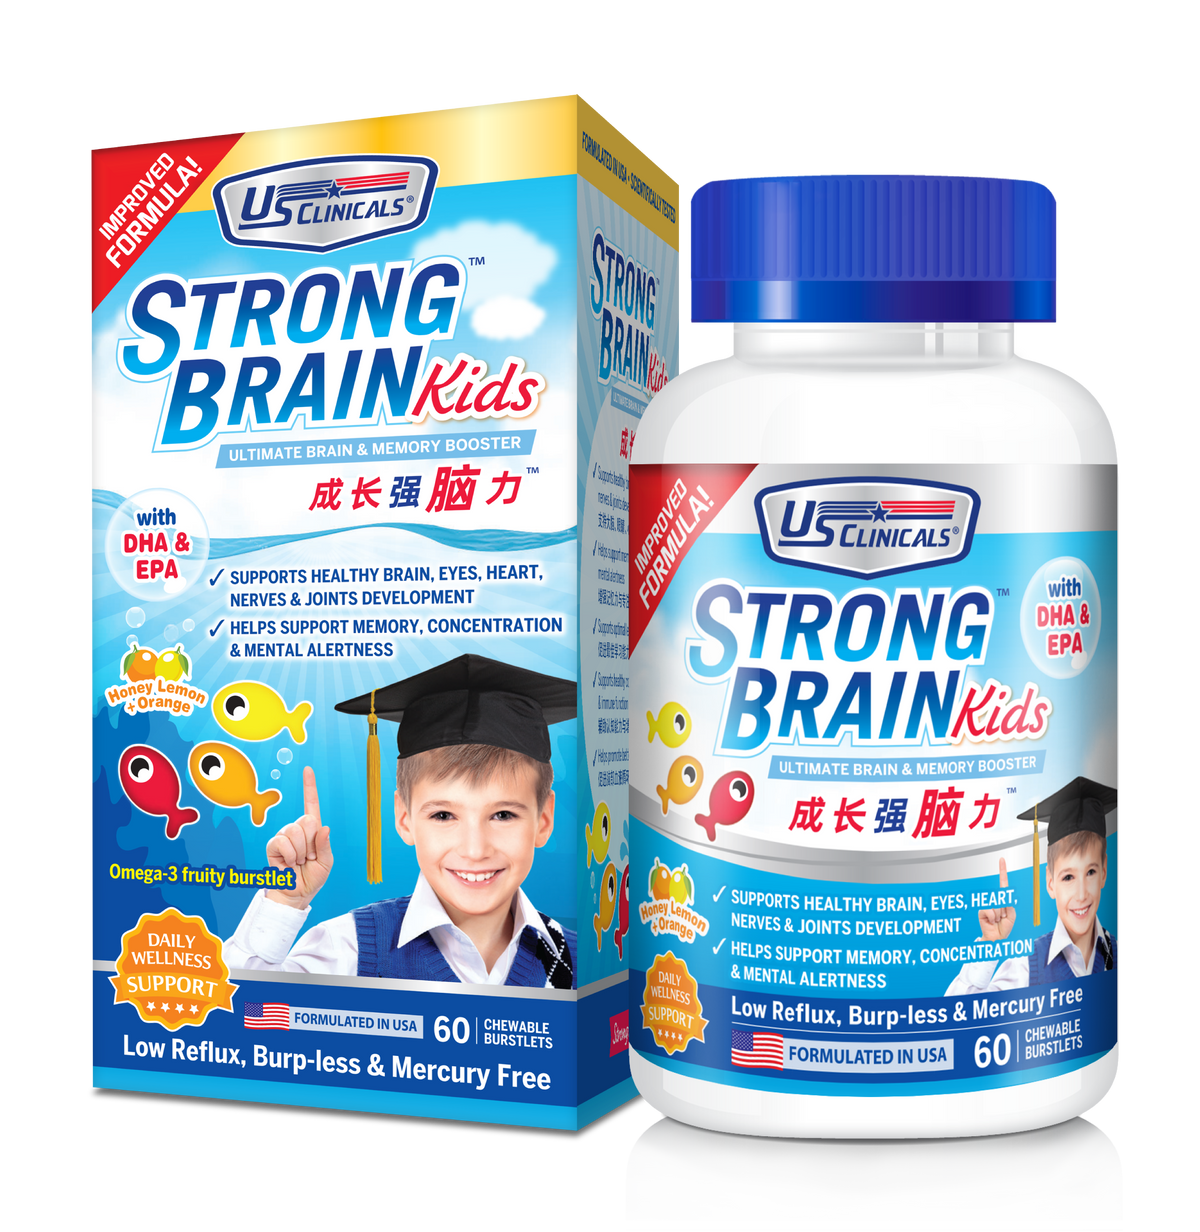 StrongBrain Kids Box and Bottle-02.png__PID:1cdc900a-3545-4c3d-9113-ad6a704aec02